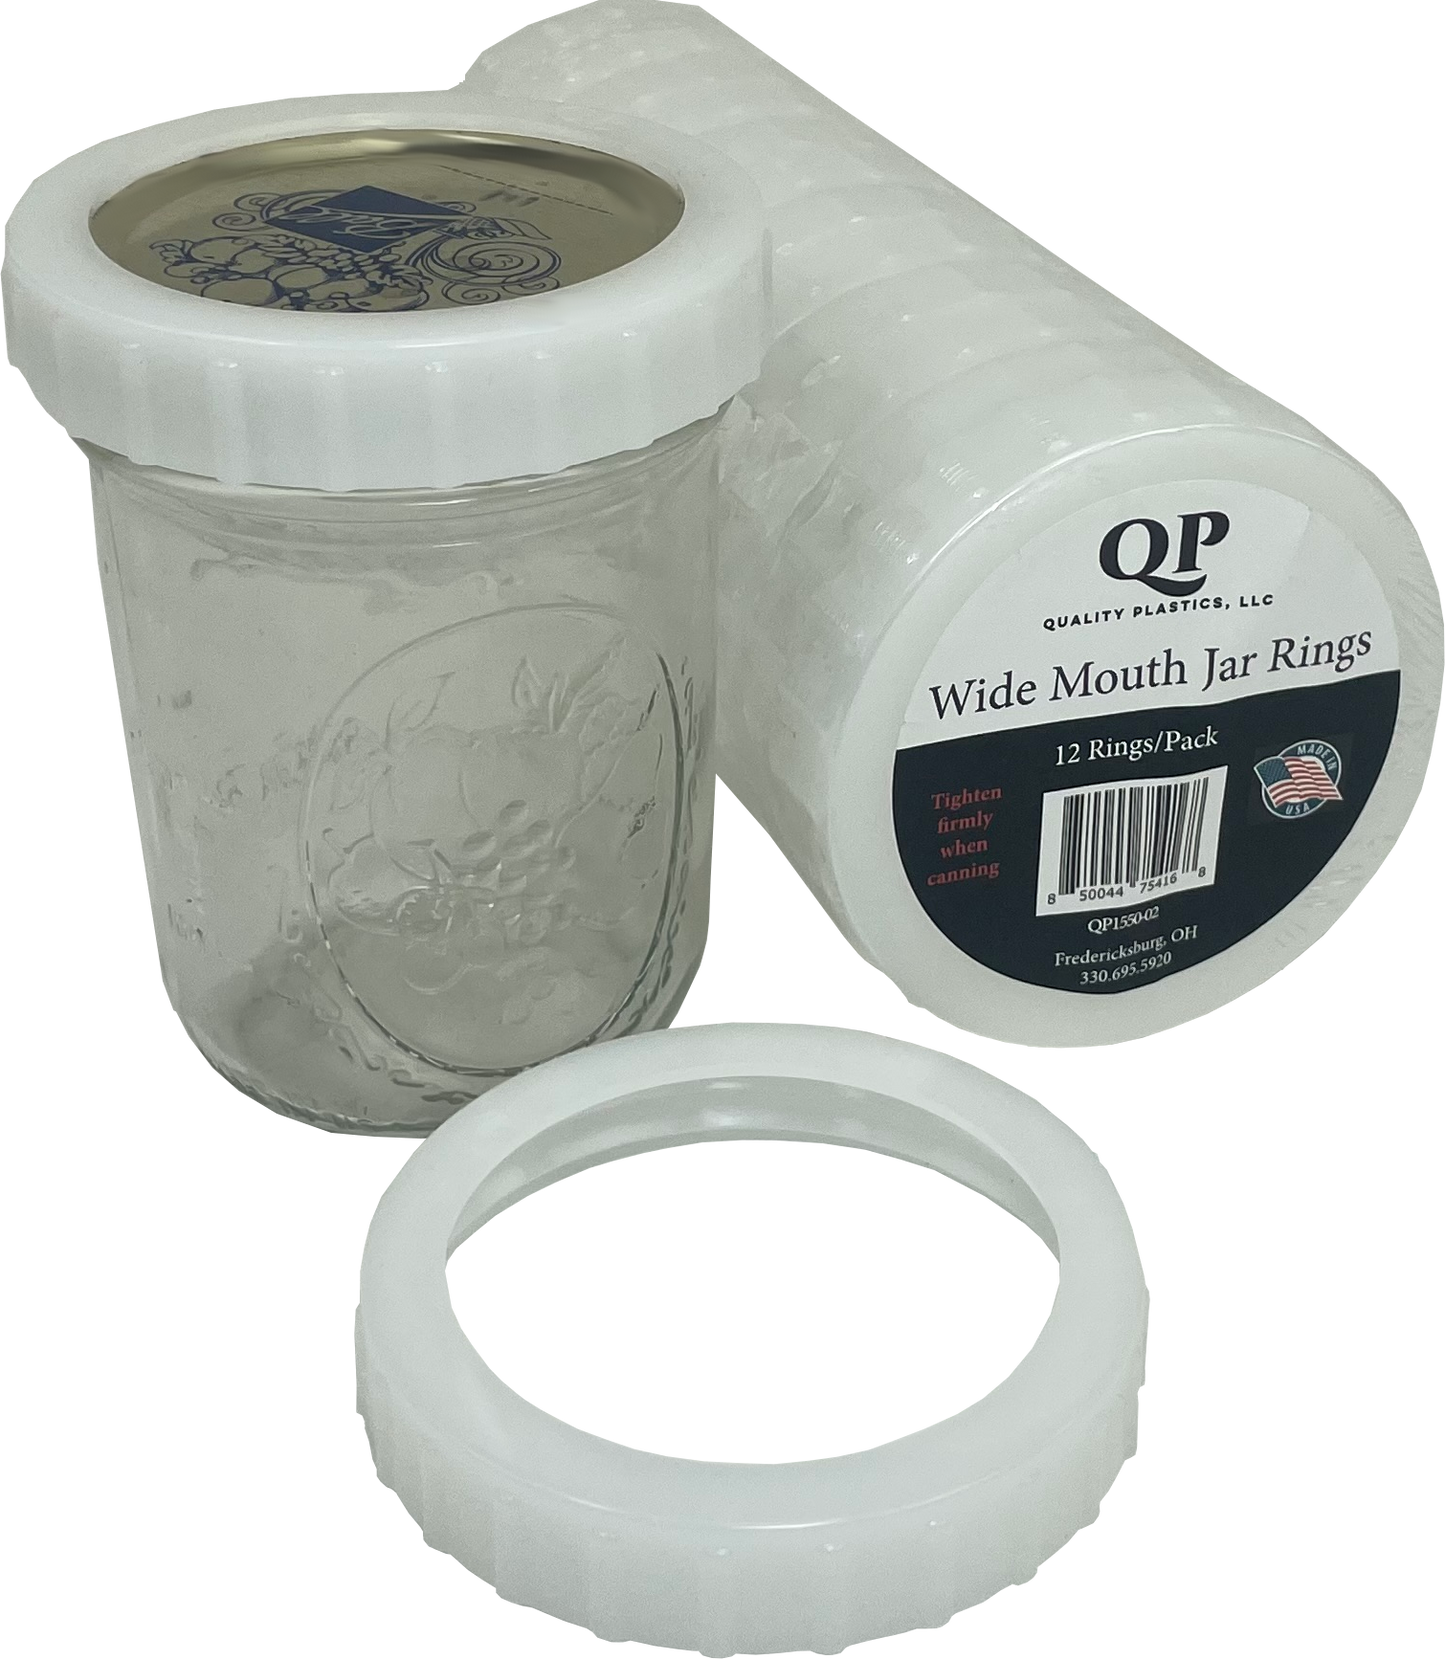 Plastic Canning Jar Rings - Wide Mouth Jar Size - 12 pack